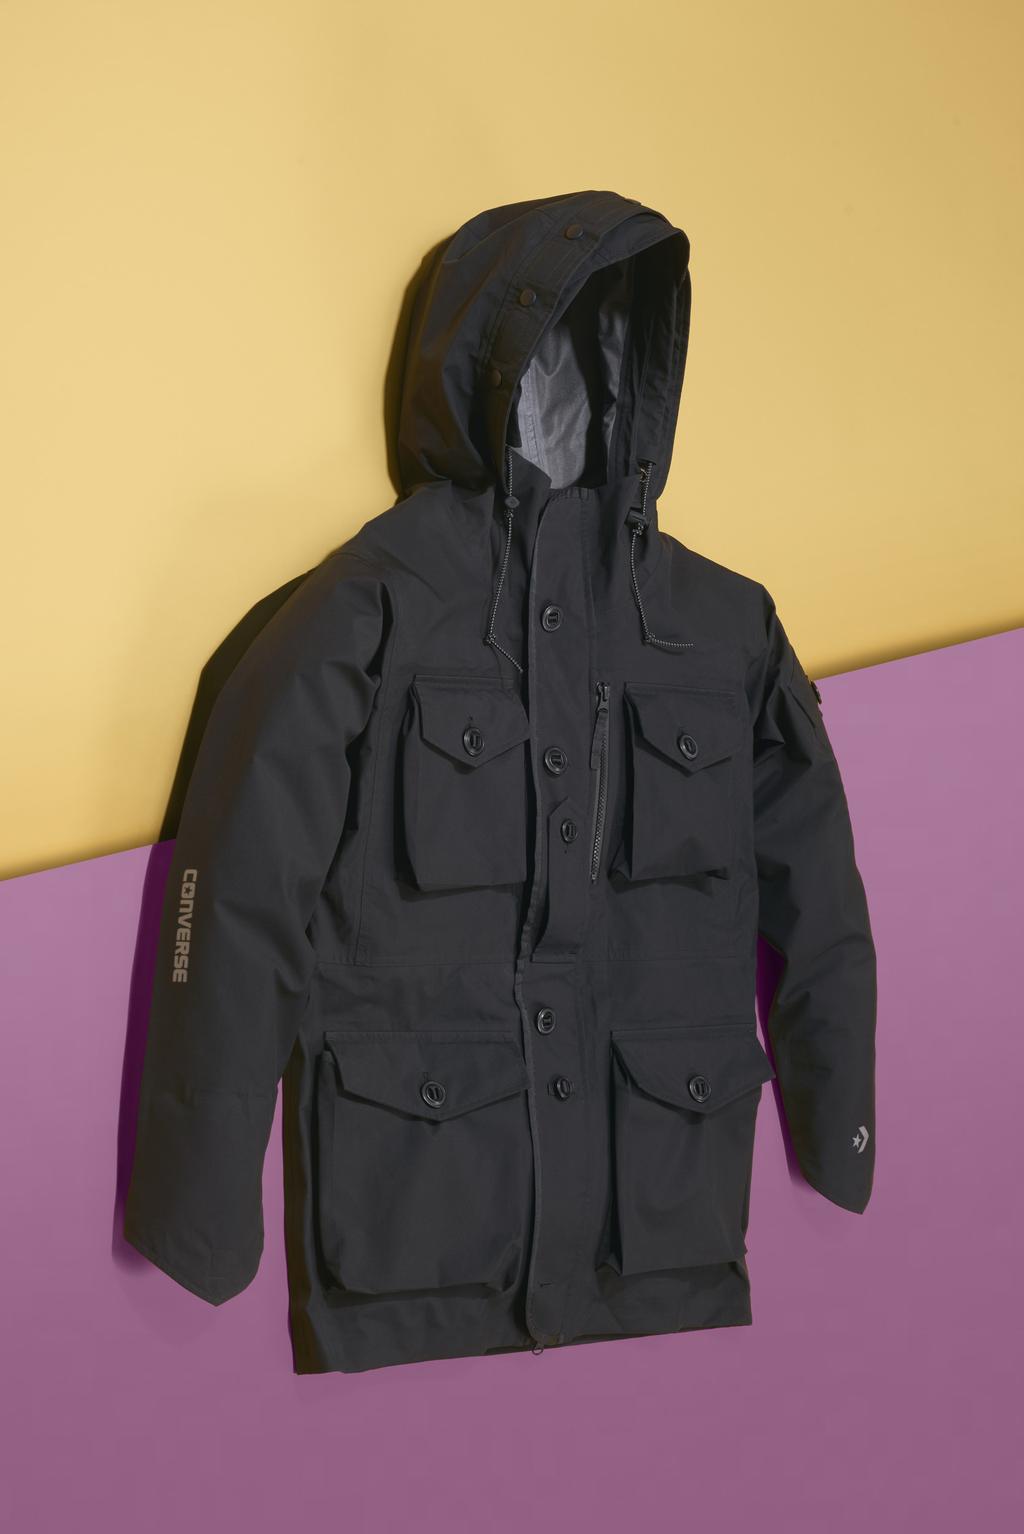 MEN S GORE-TEX UTILITY JACKET The Utility Jacket offers function and enables exploration.